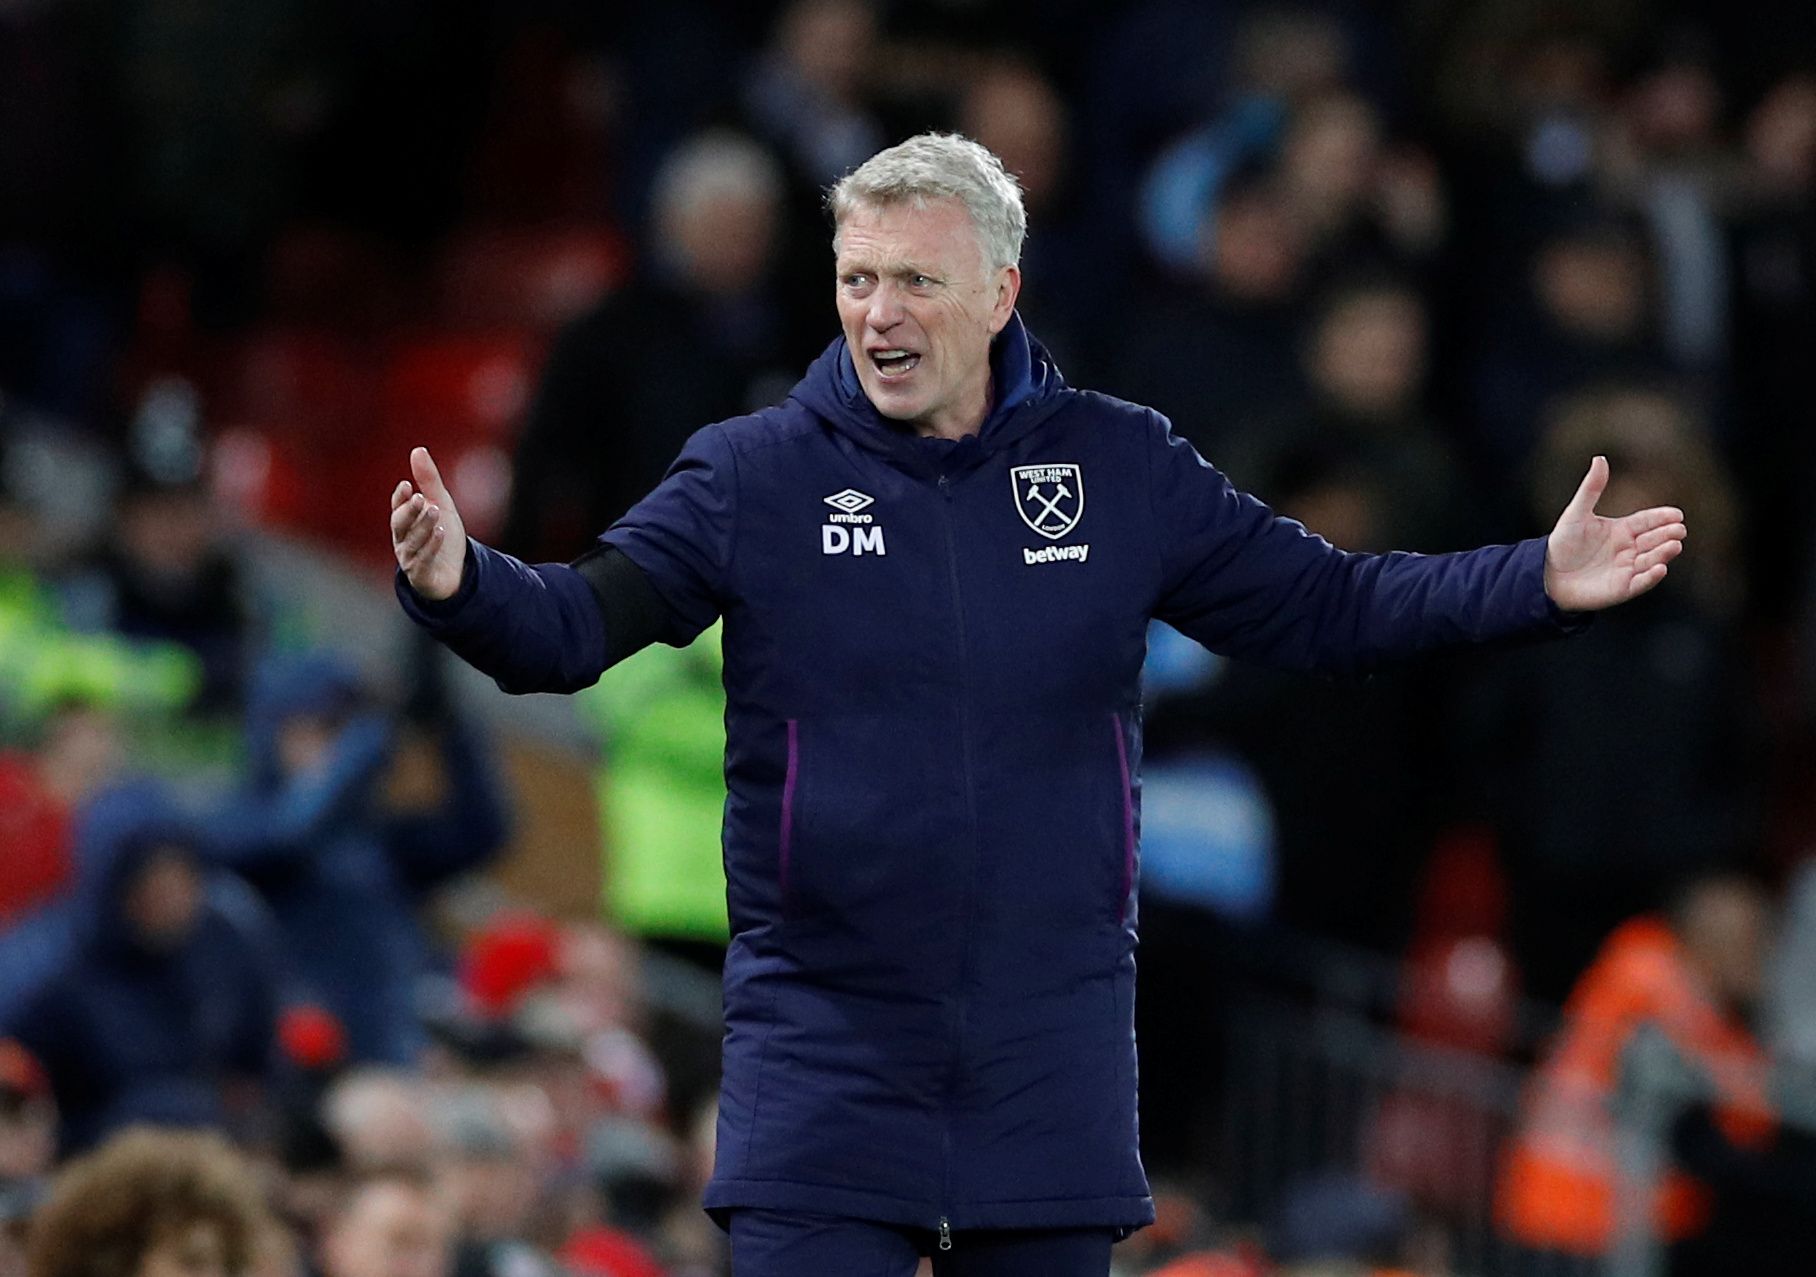 Soccer Football - Premier League - Liverpool v West Ham United - Anfield, Liverpool, Britain - February 24, 2020  West Ham United manager David Moyes reacts REUTERS/Phil Noble  EDITORIAL USE ONLY. No use with unauthorized audio, video, data, fixture lists, club/league logos or 